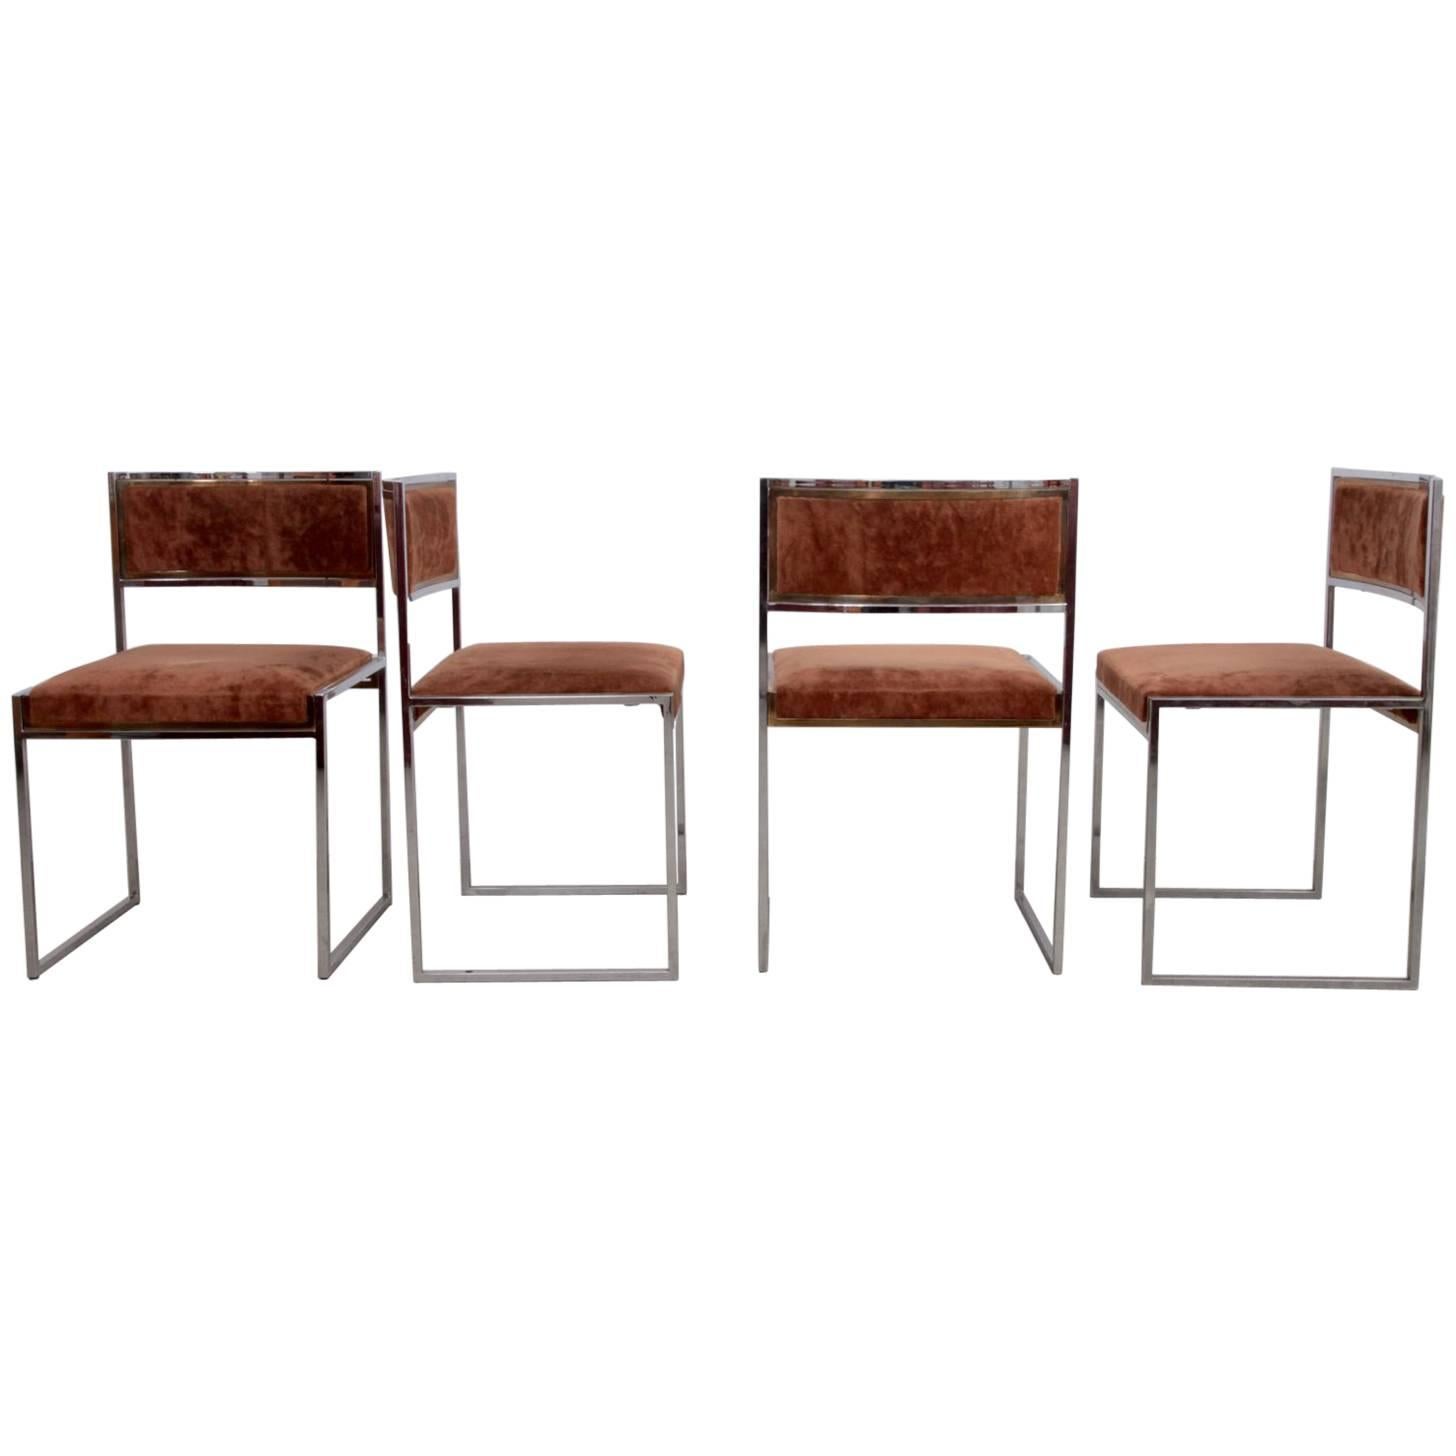 Set of Four Dining Chairs by Willy Rizzo